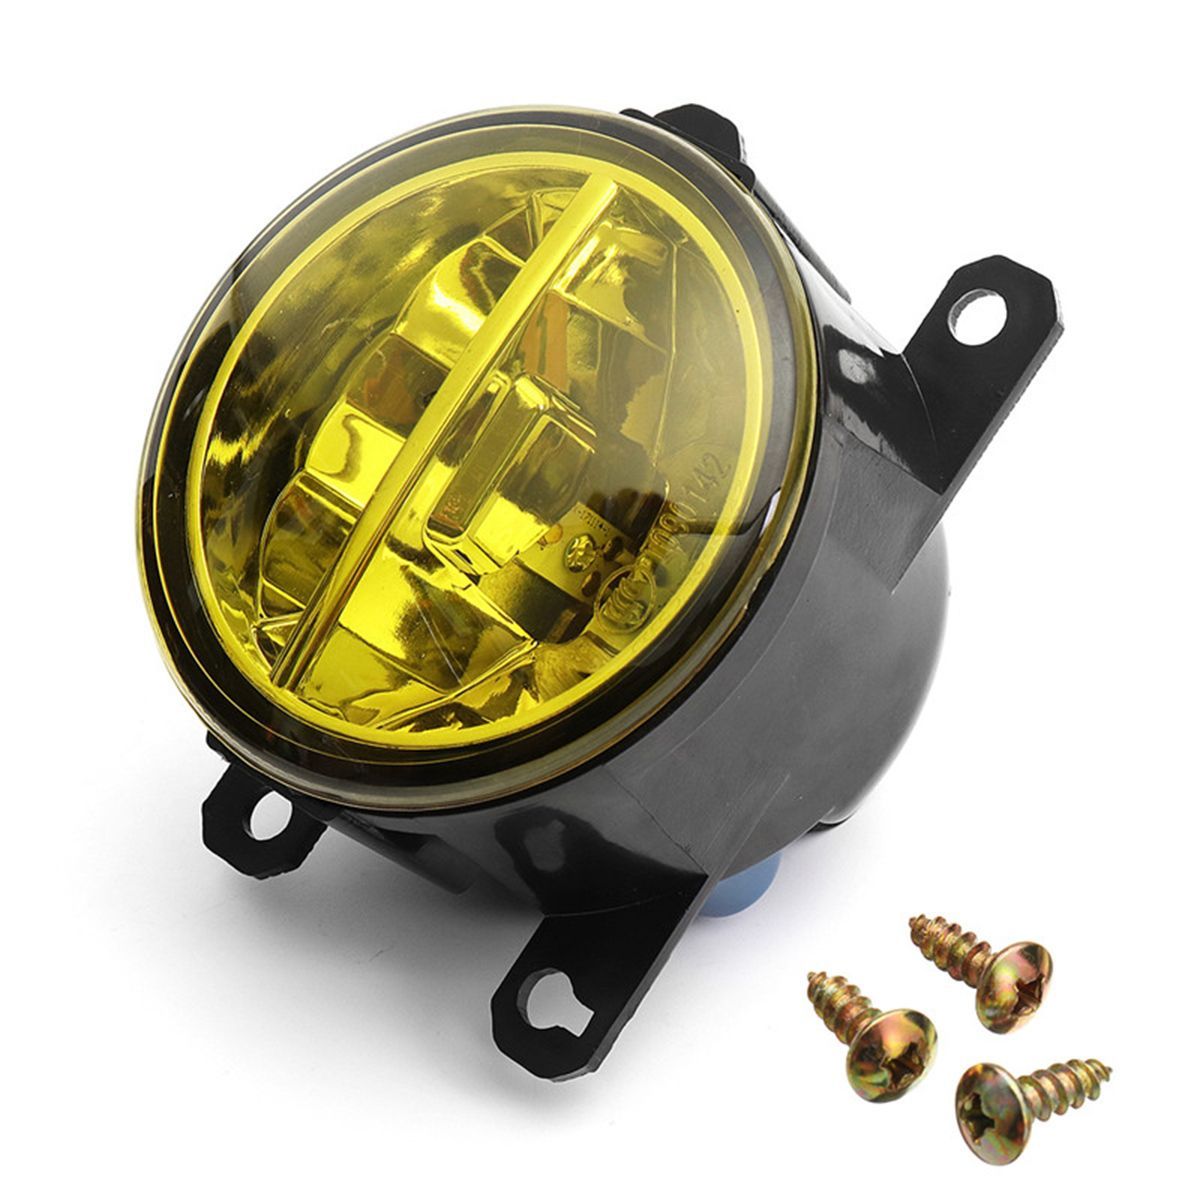 RightLeft-LED-Front-Fog-Light-Lamp-Lens-with-H8H11-Bulbs-Amber-Universal-For-Honda-Civic-Fit-Odyssey-1732027